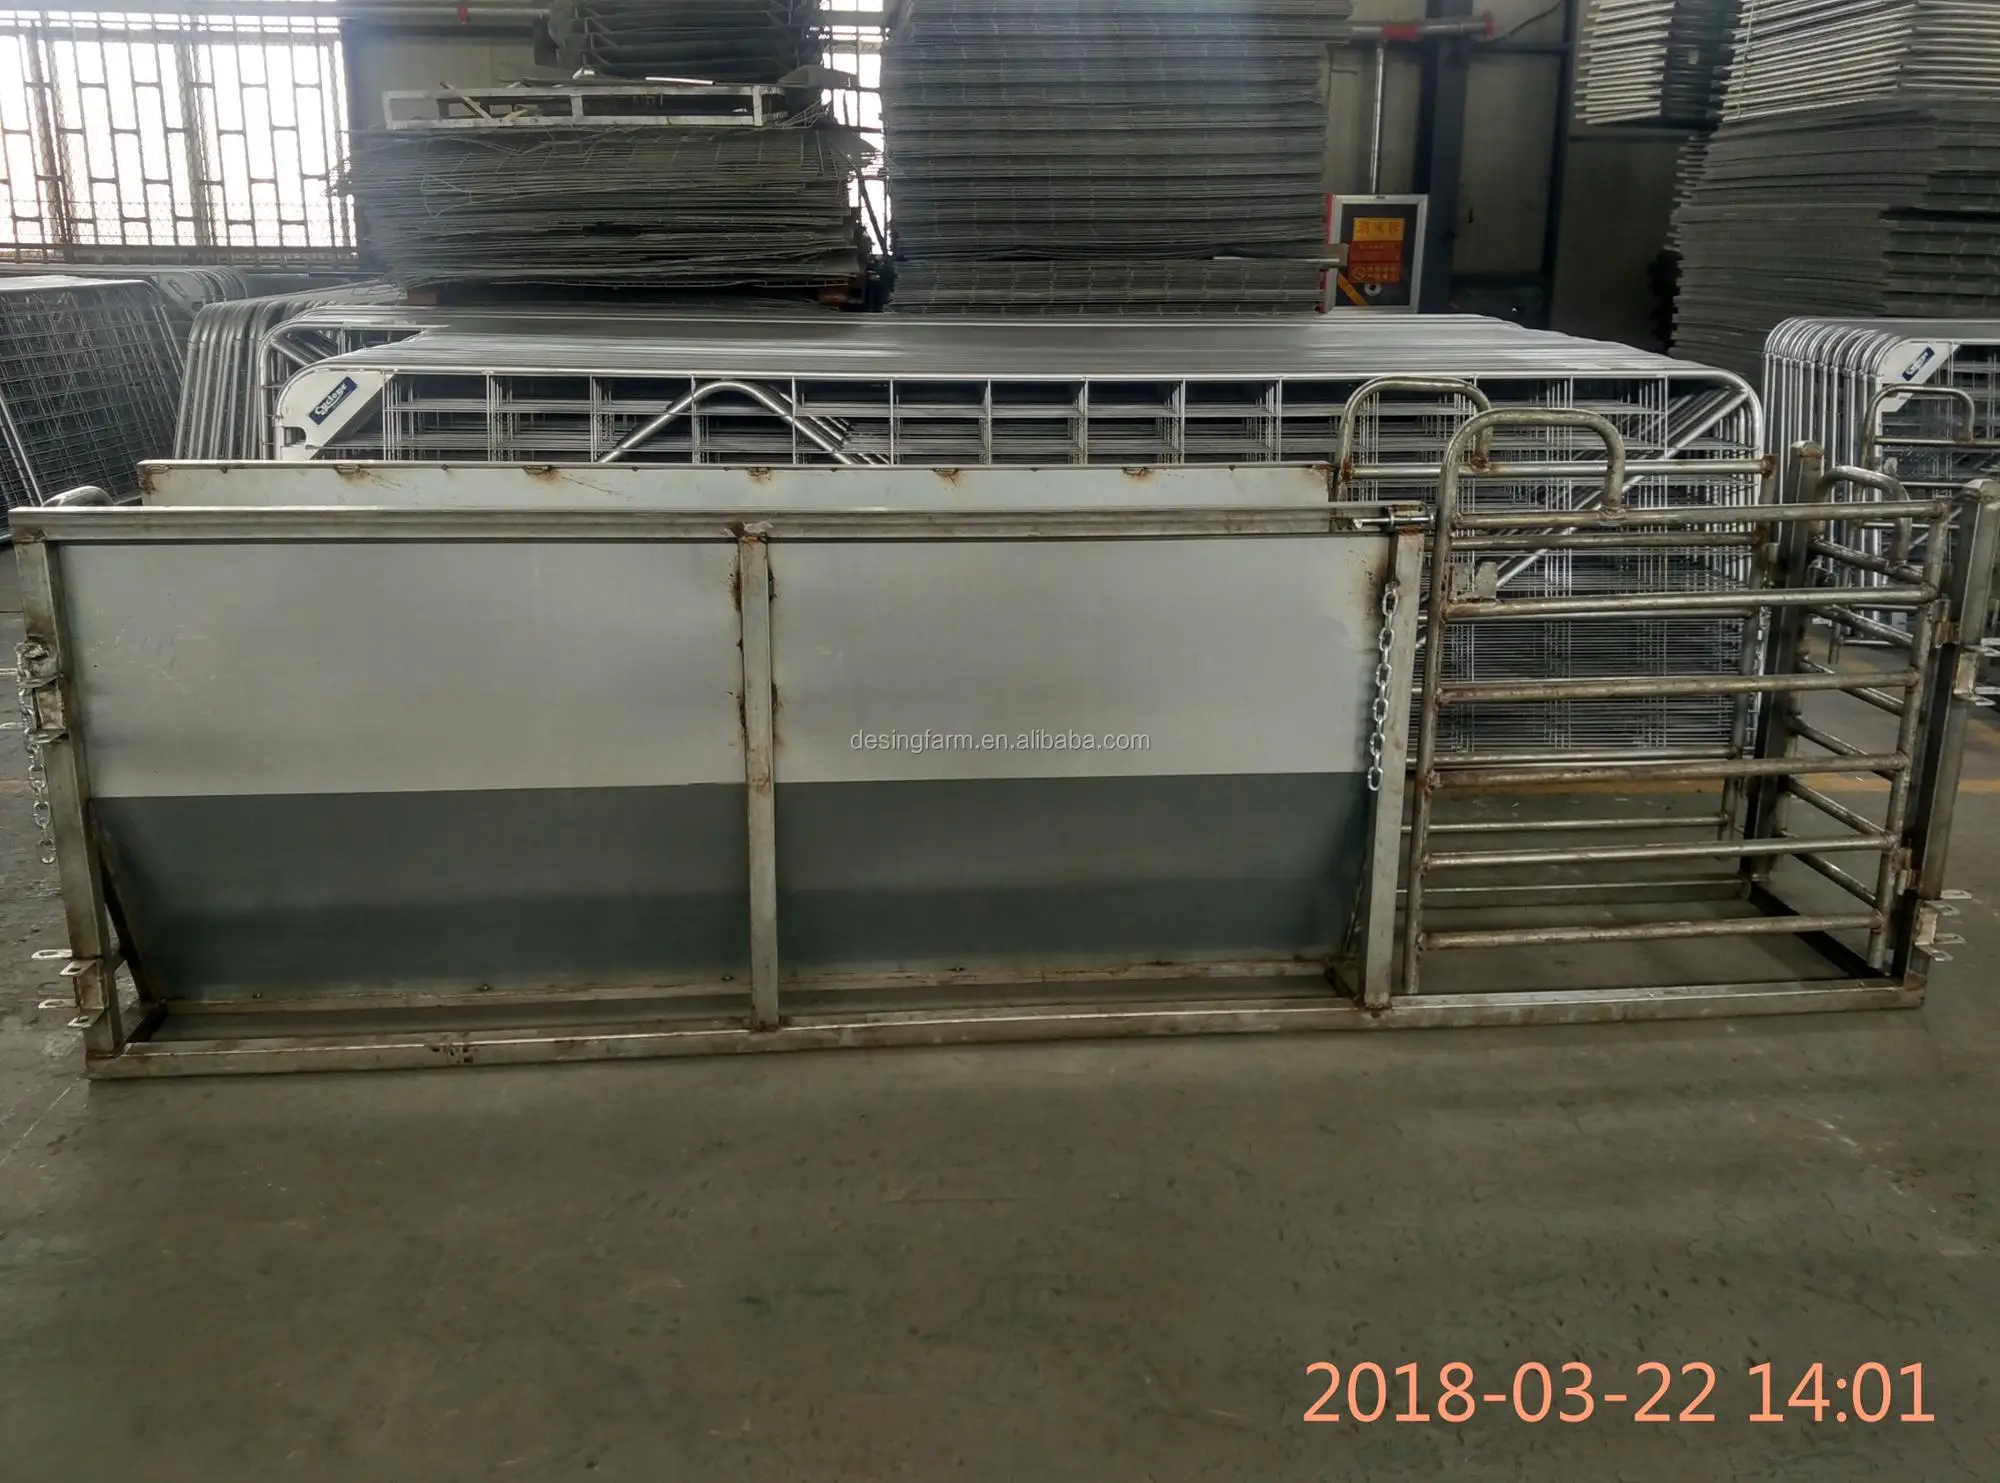 Desing well-designed best livestock scales factory direct supply high quality-2